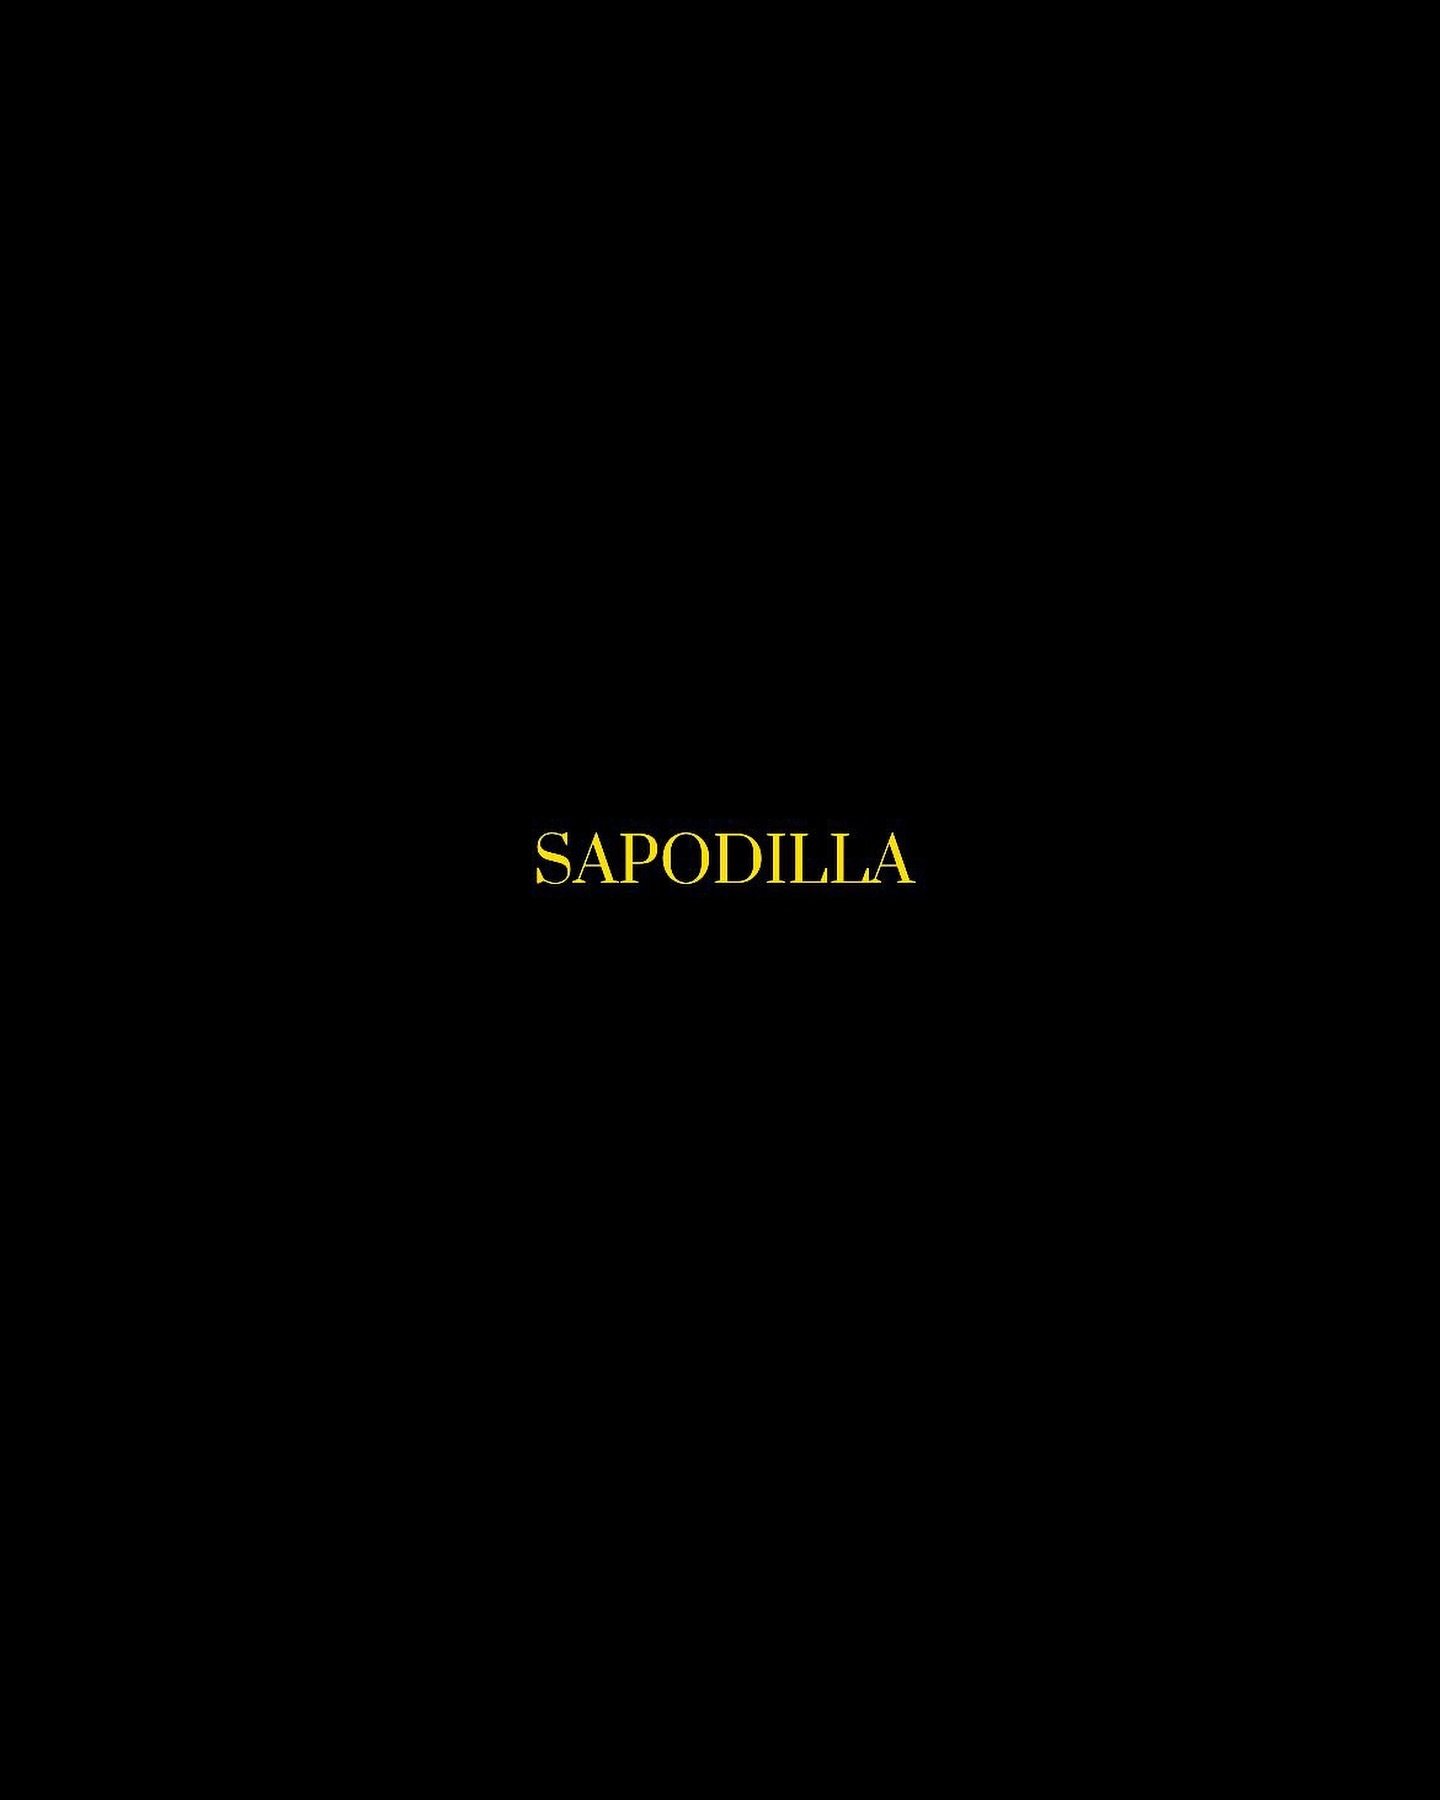 This is my personal favorite on SAPODILLA.. 

Choose your favorite below!

LINK IN BIO 🔗 
#rnb #neosoul #indiemusic